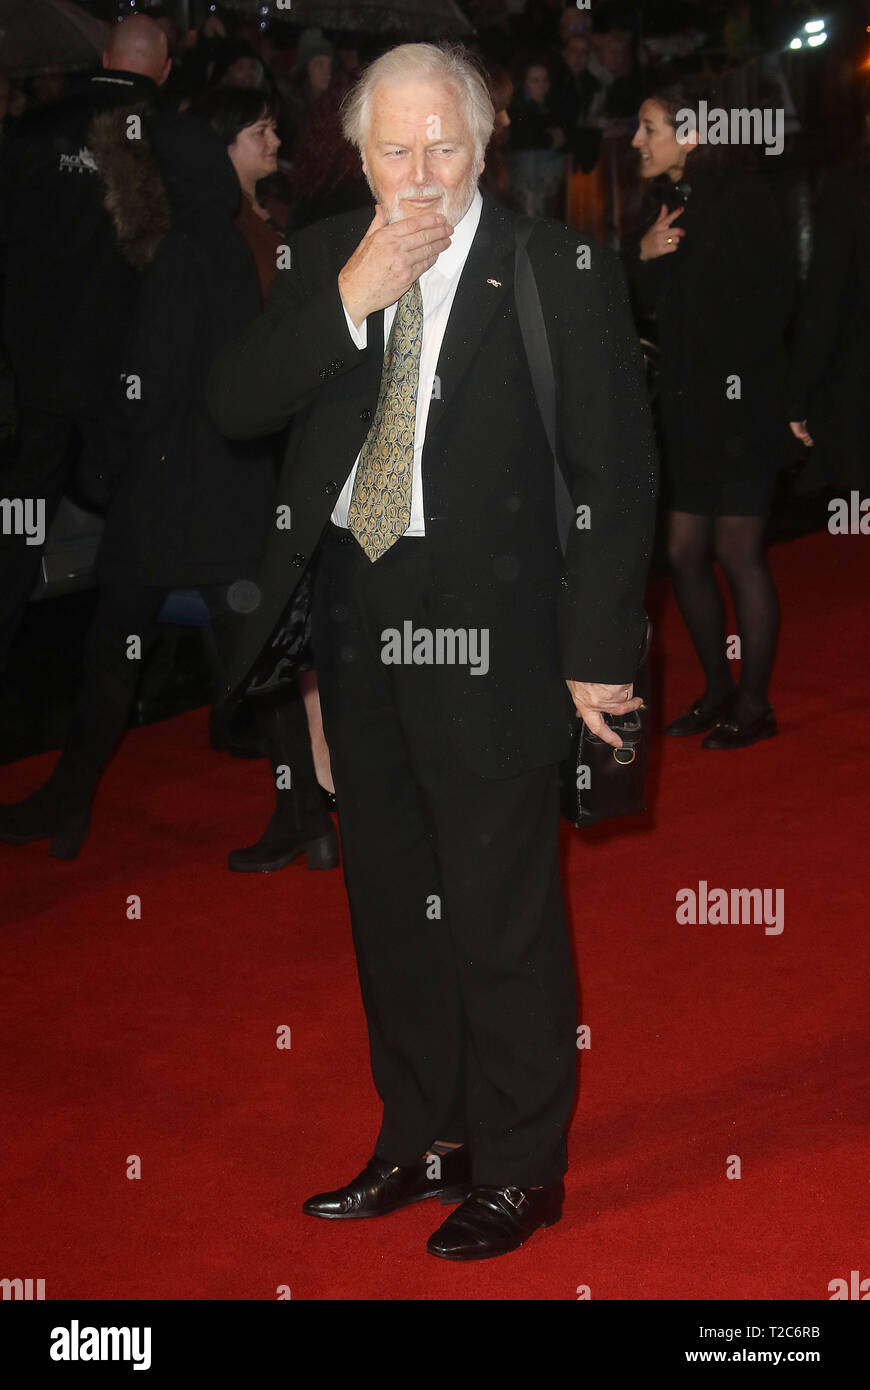 Jan 26, 2016 - London, England, UK - 'Dad's Army' World Premiere, Odeon Leicester Square - Red Carpet Arrivals Photo Shows: Ian Lavender Stock Photo